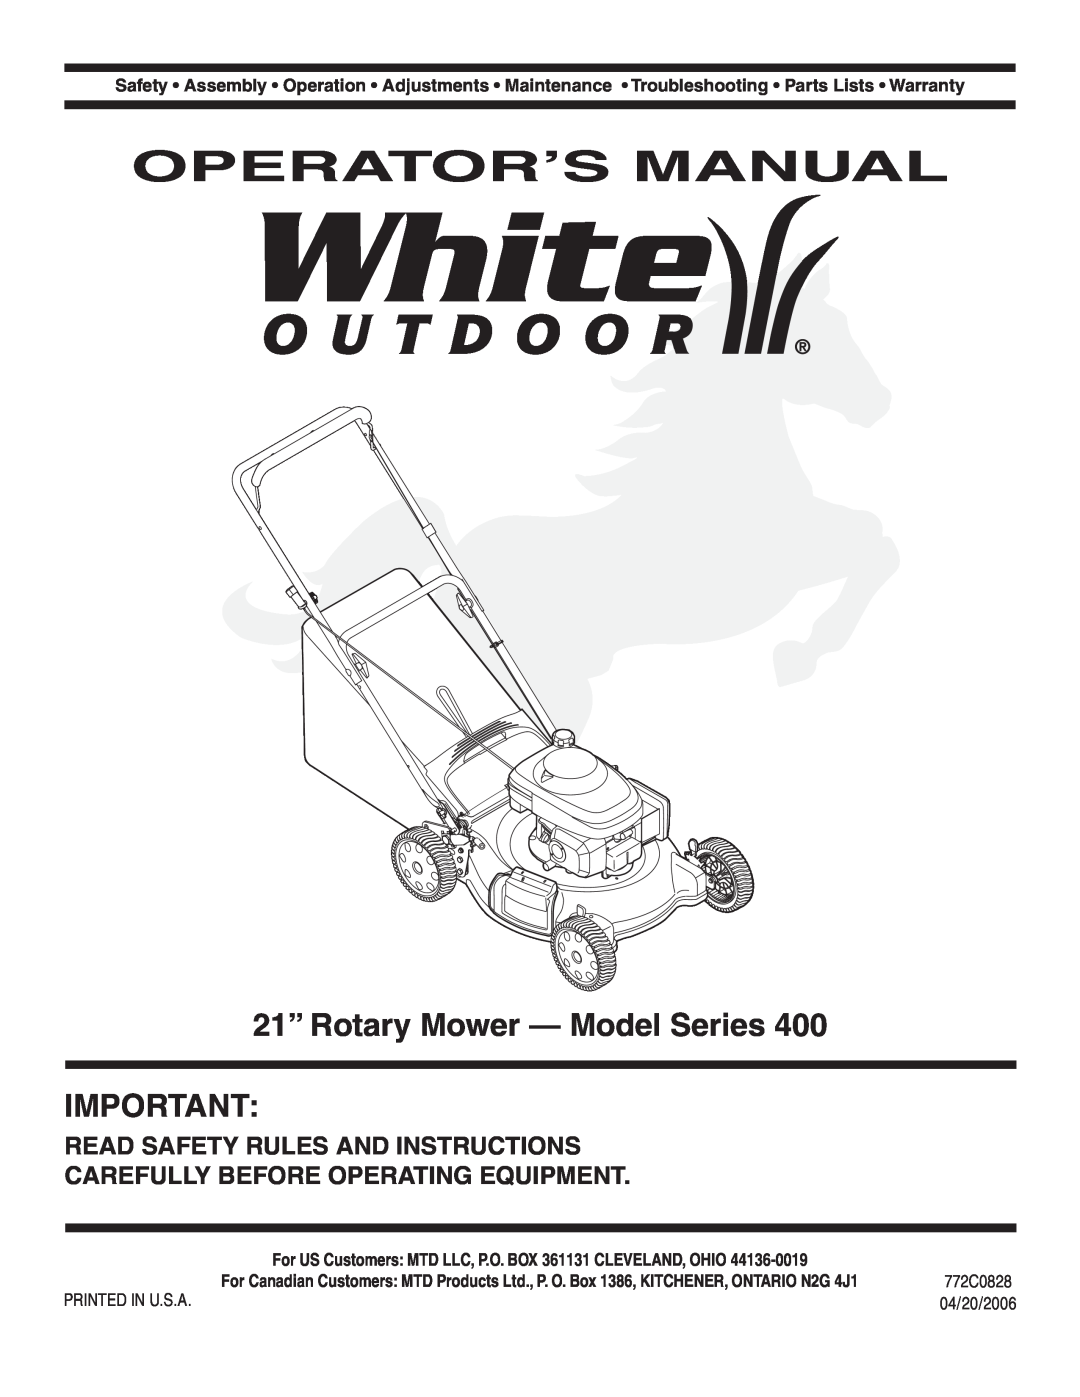 MTD 400 warranty Operator’S Manual, 21” Rotary Mower - Model Series, Read Safety Rules And Instructions, 772C0828 